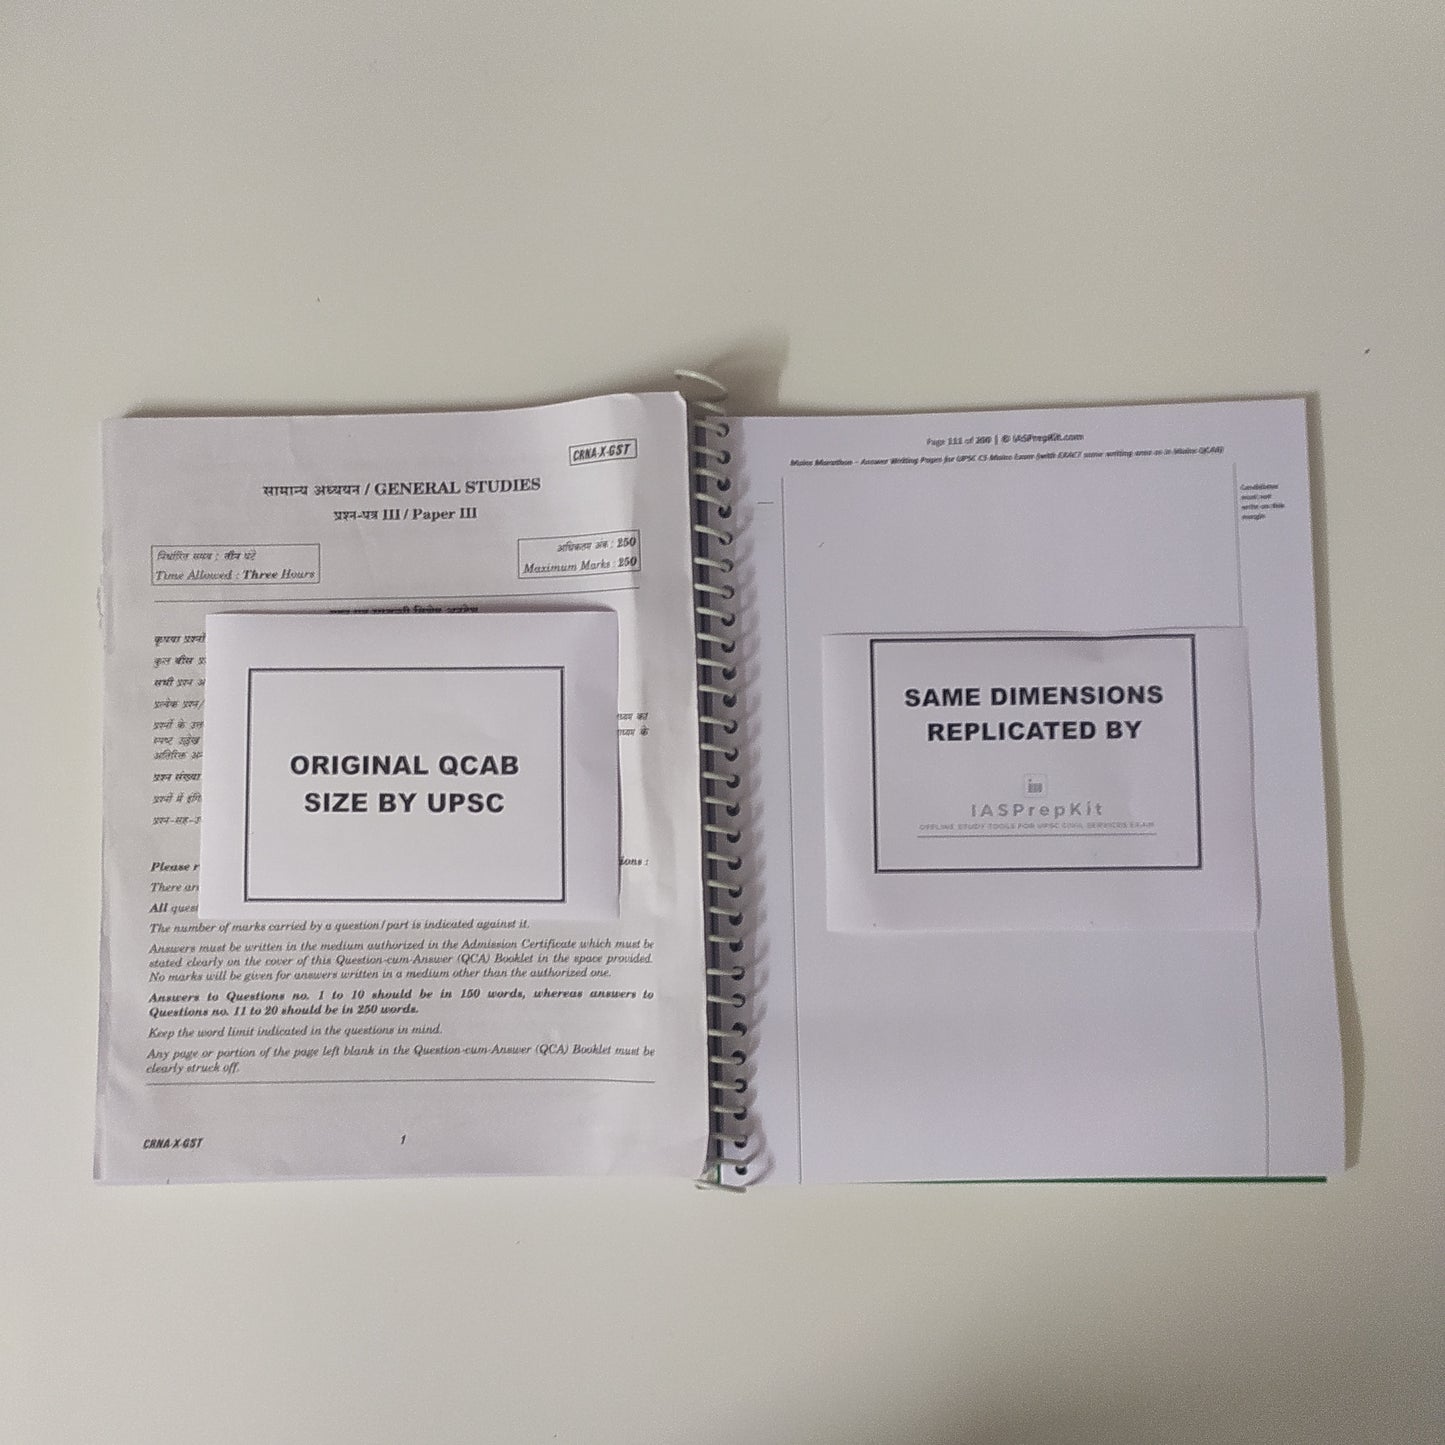 1 Booklet - Mains Marathon - Answer Writing Booklets for UPSC CS Mains Exam with exact same dimensions as in UPSC QCAB (200 pages in each booklet)